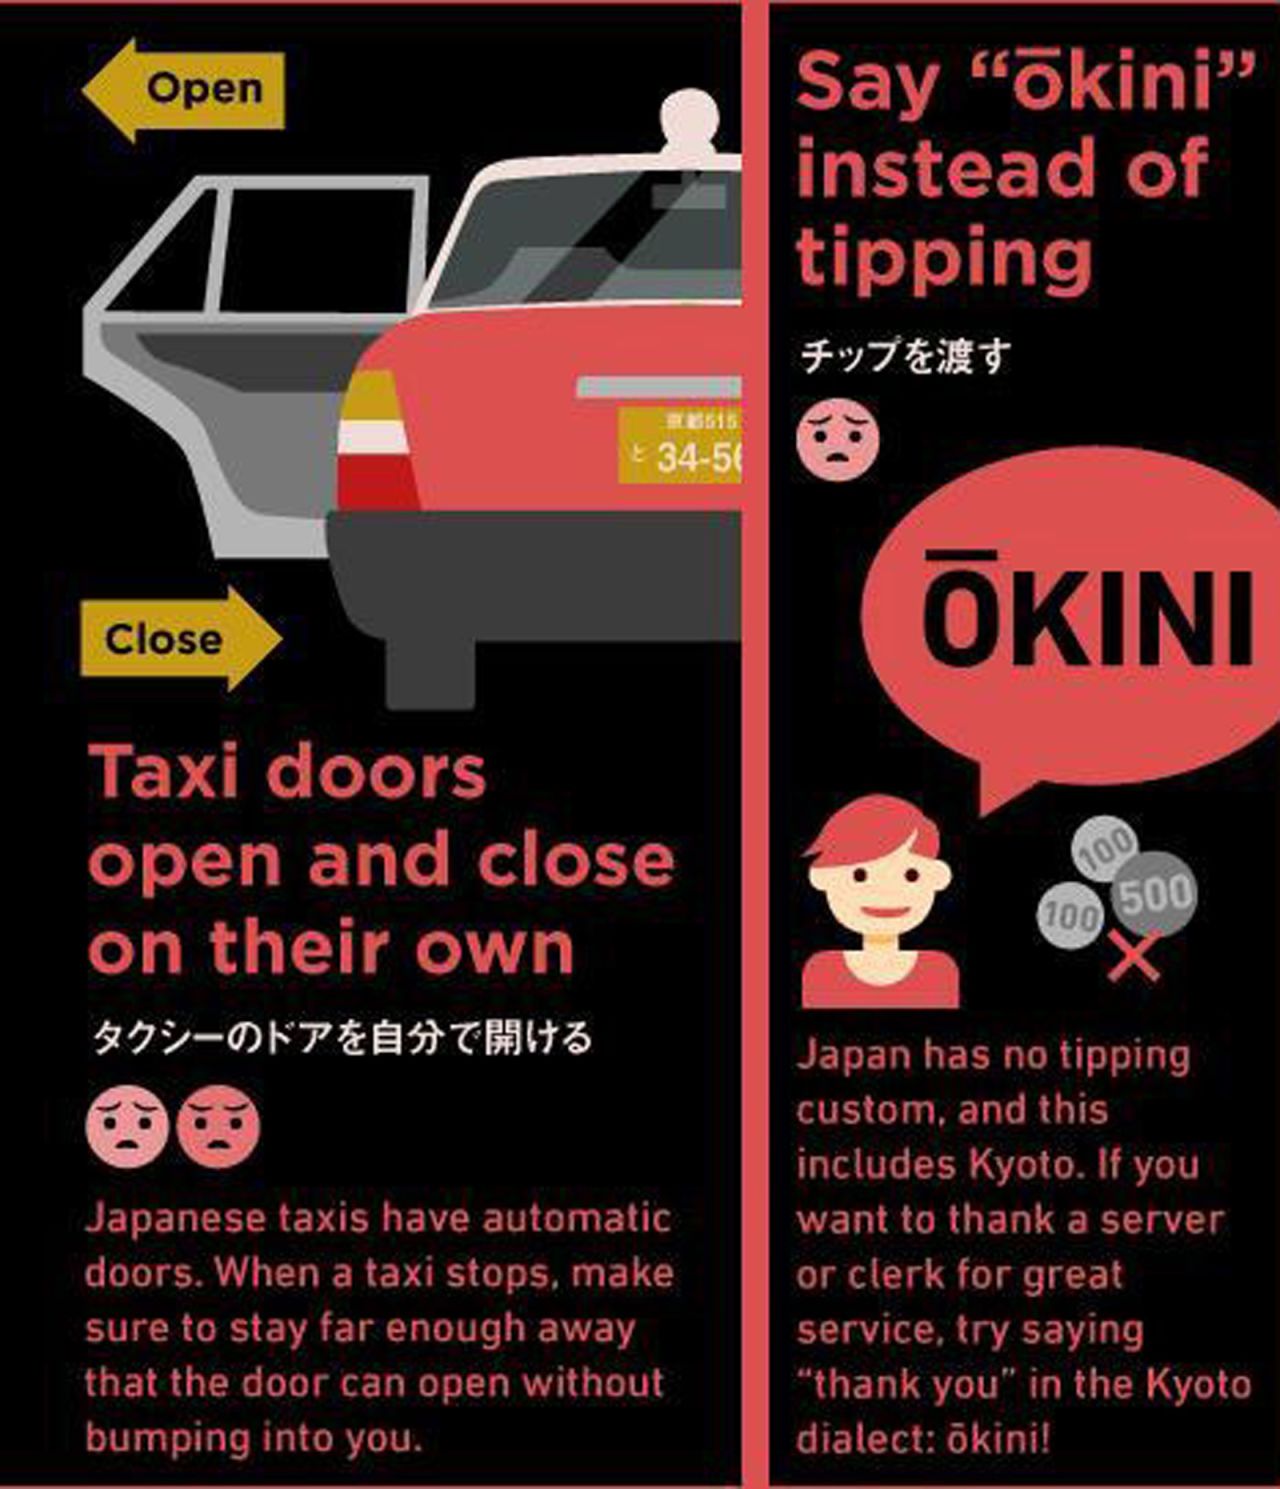 Causing the mildest level of distress among Kyotoites are tipping tourists. Just "say 'okini' instead of tipping," says the guide. The guide also reminds travelers that they need to allow space for taxi doors to be opened remotely by drivers. 